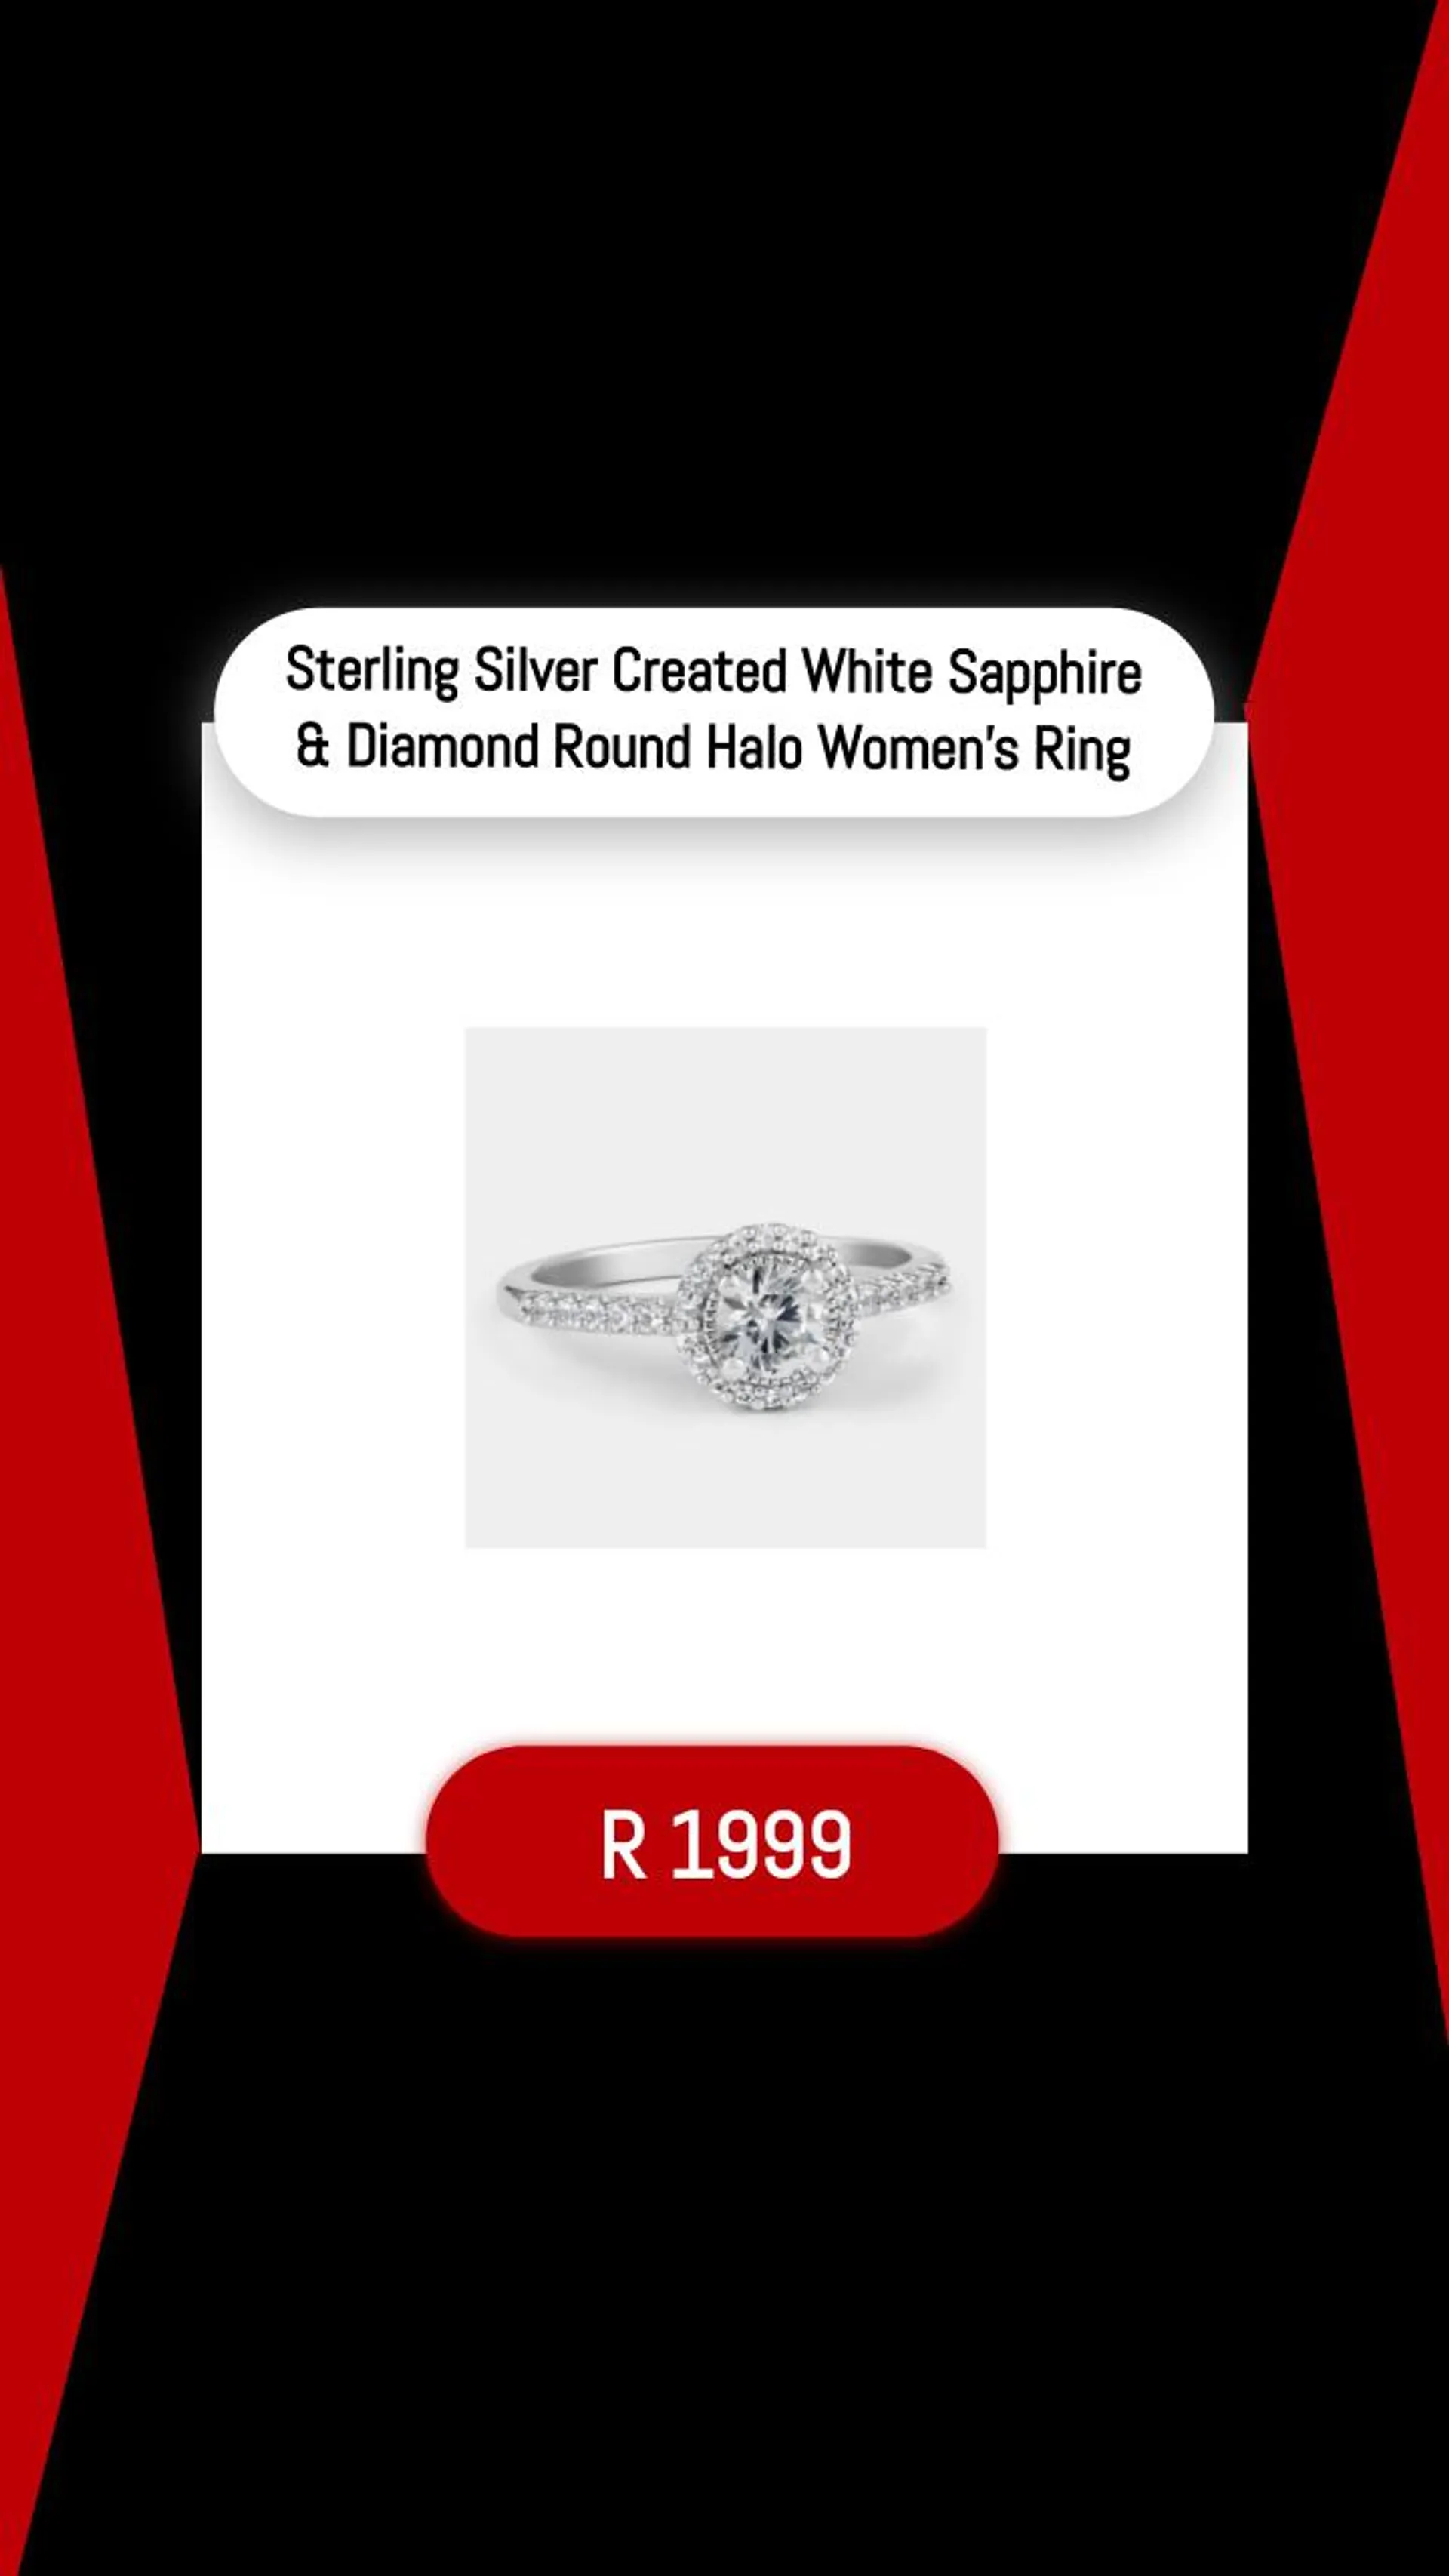 Sterling Silver Created White Sapphire & Diamond Round Halo Women’s Ring